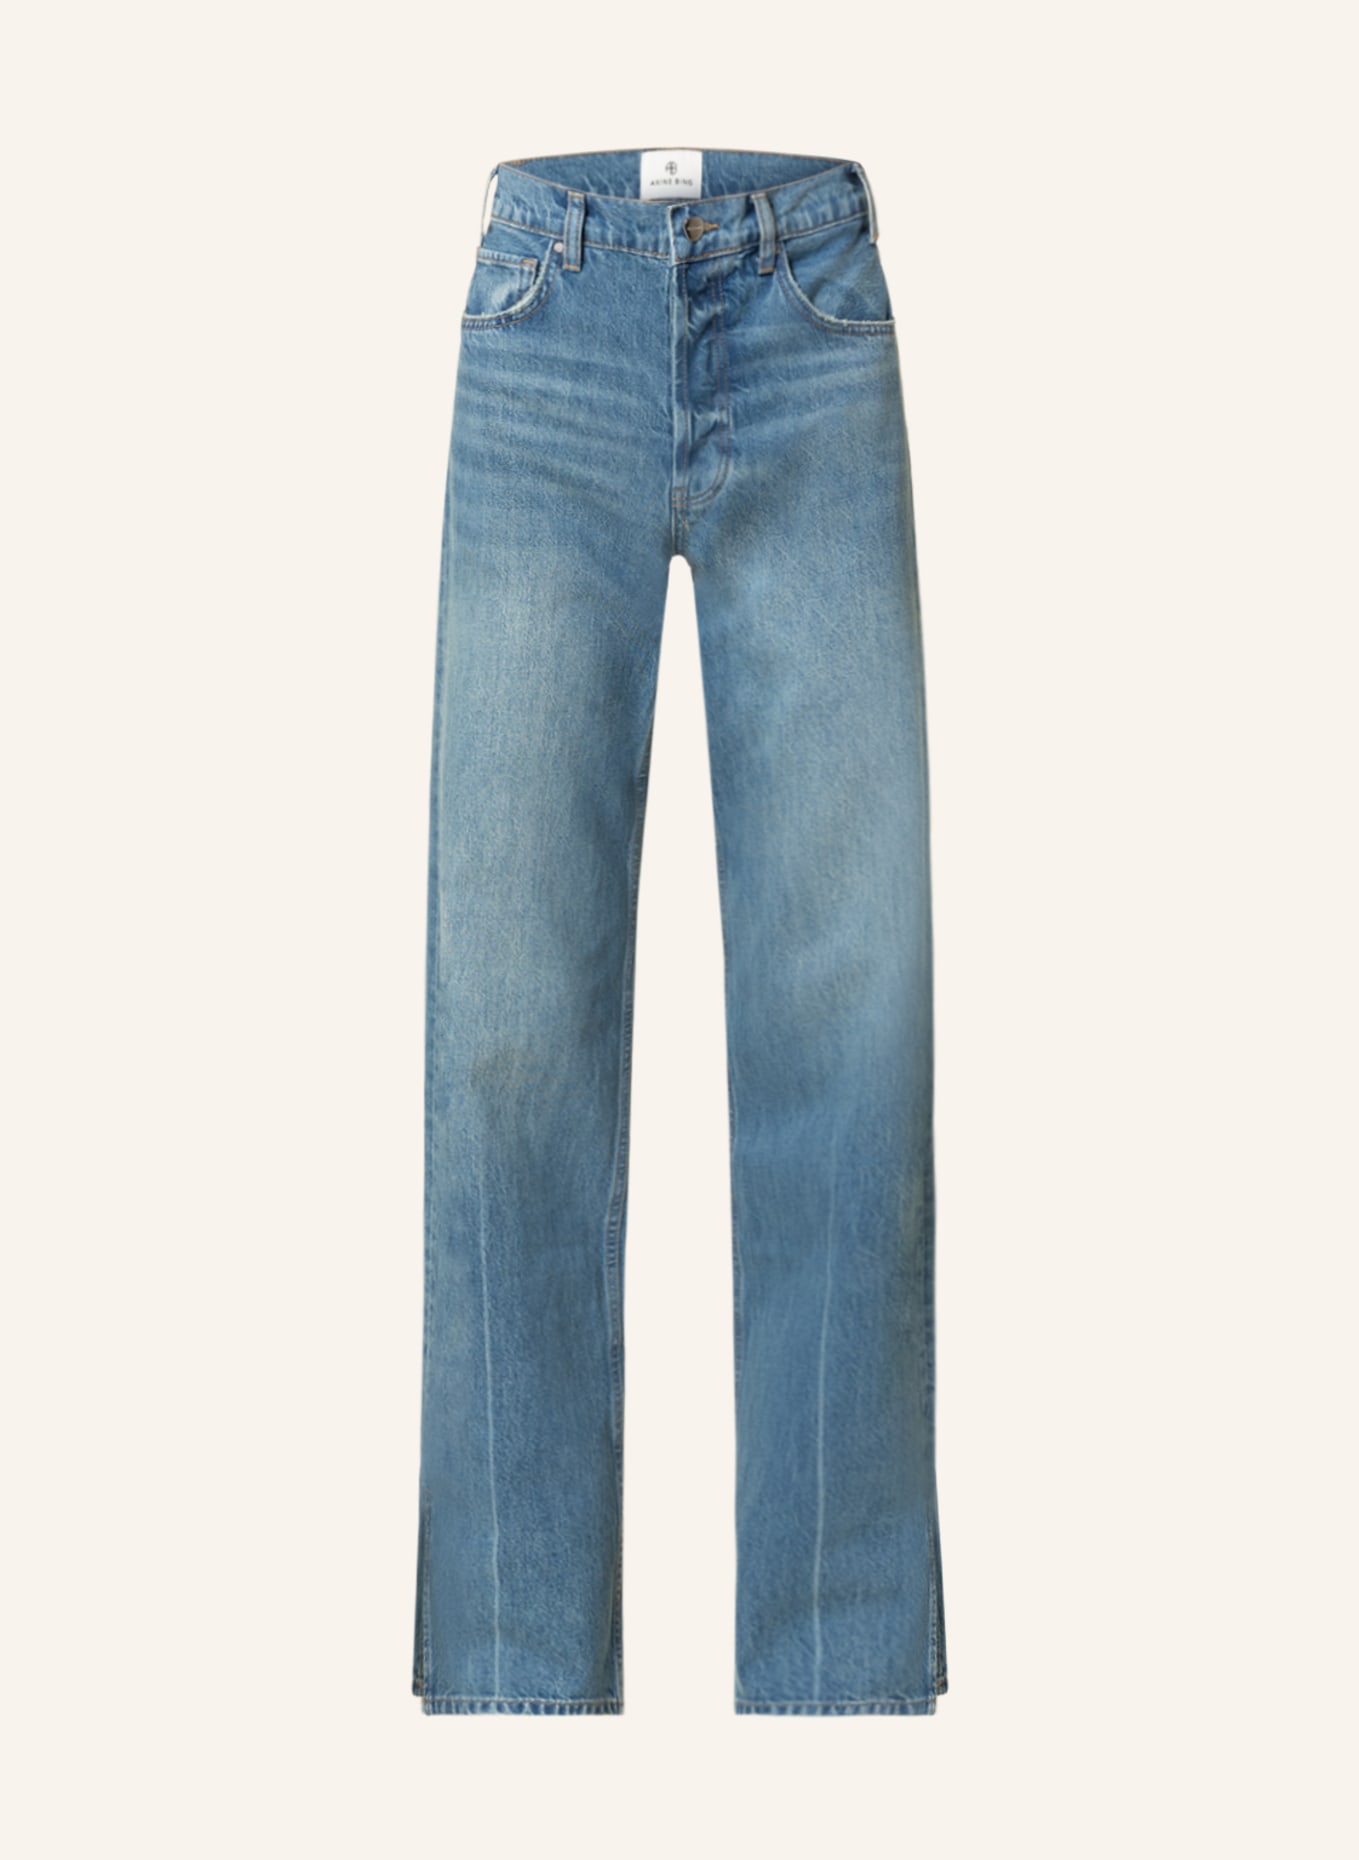 ANINE BING Straight Jeans ROY, Farbe: WASHED BLUE WASHED BLUE (Bild 1)